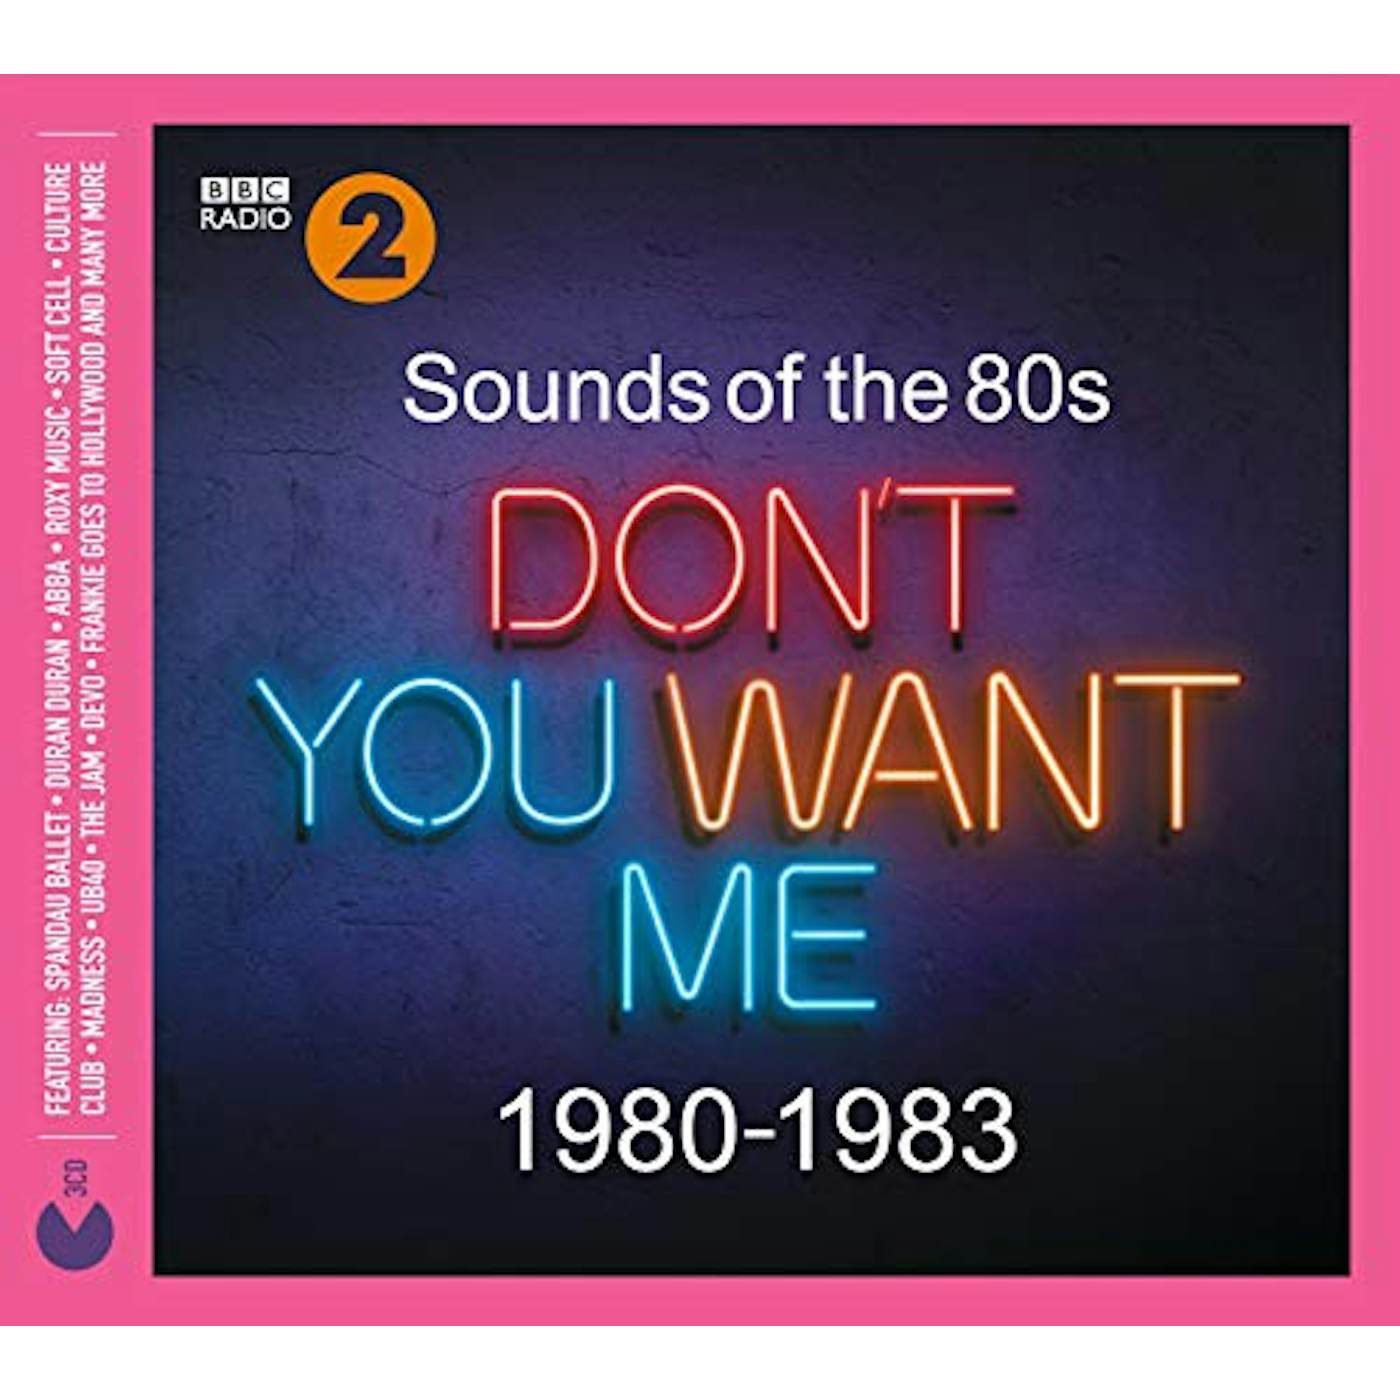 SOUNDS OF THE 80S: DON'T YOU WANT ME (1980-1983) CD